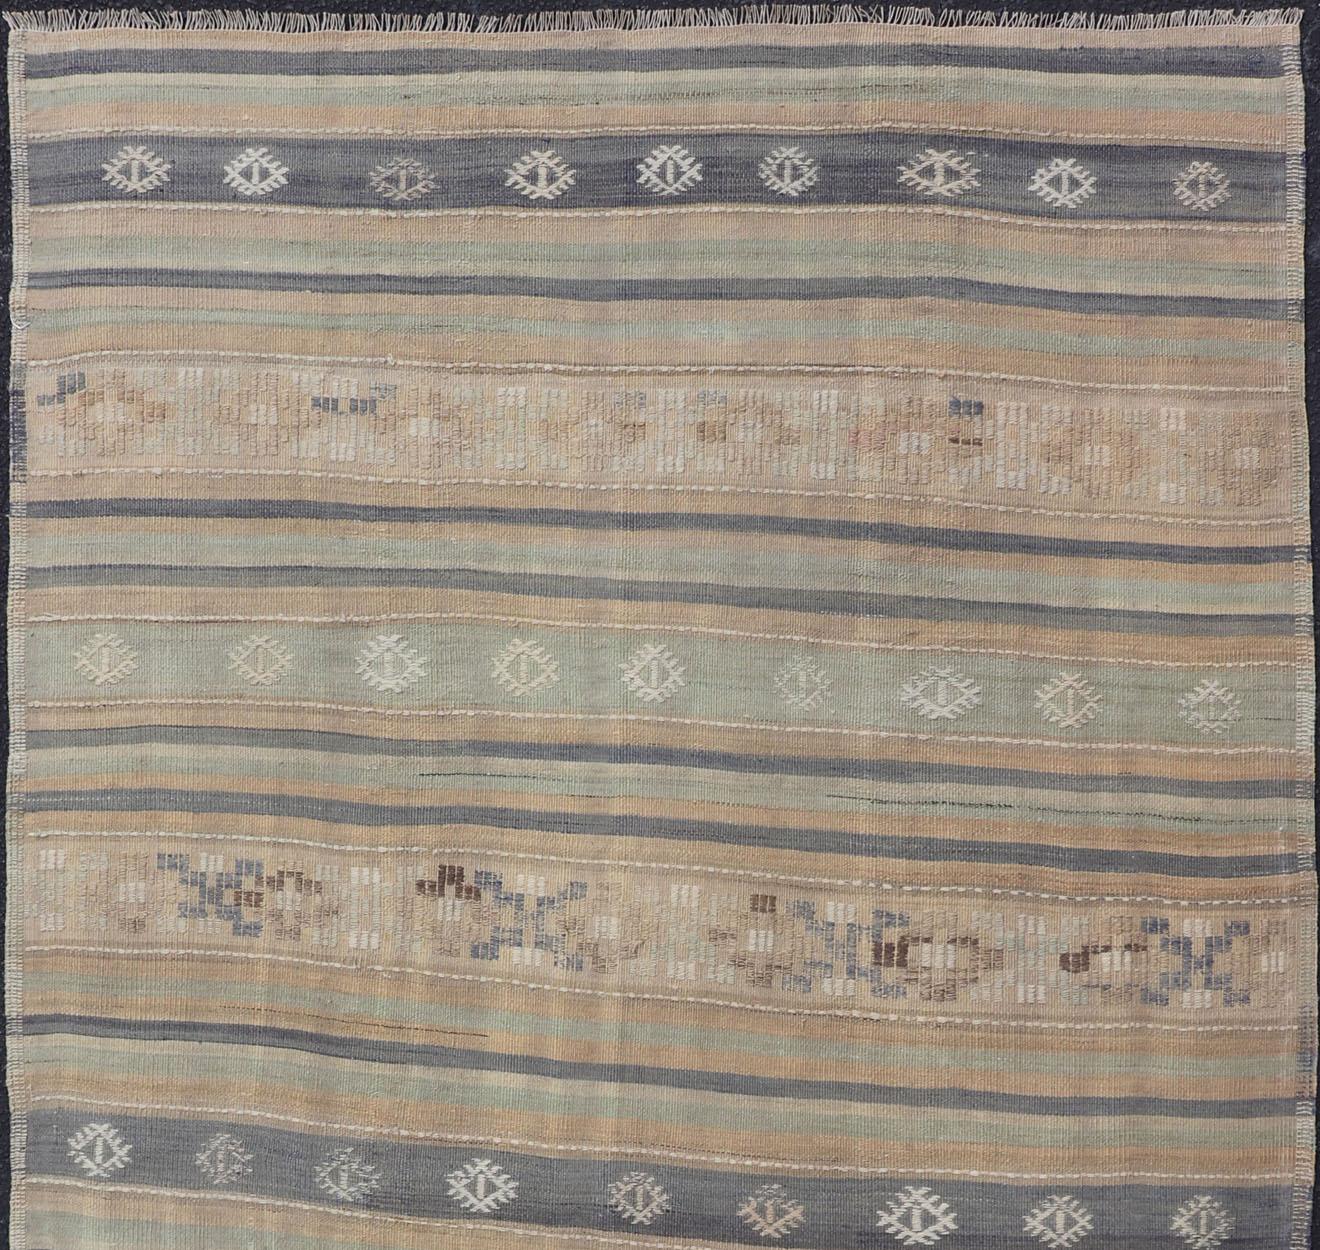 Vintage Hand Woven Turkish Kilim with Stripes in Light Taupe and Neutral Colors For Sale 2